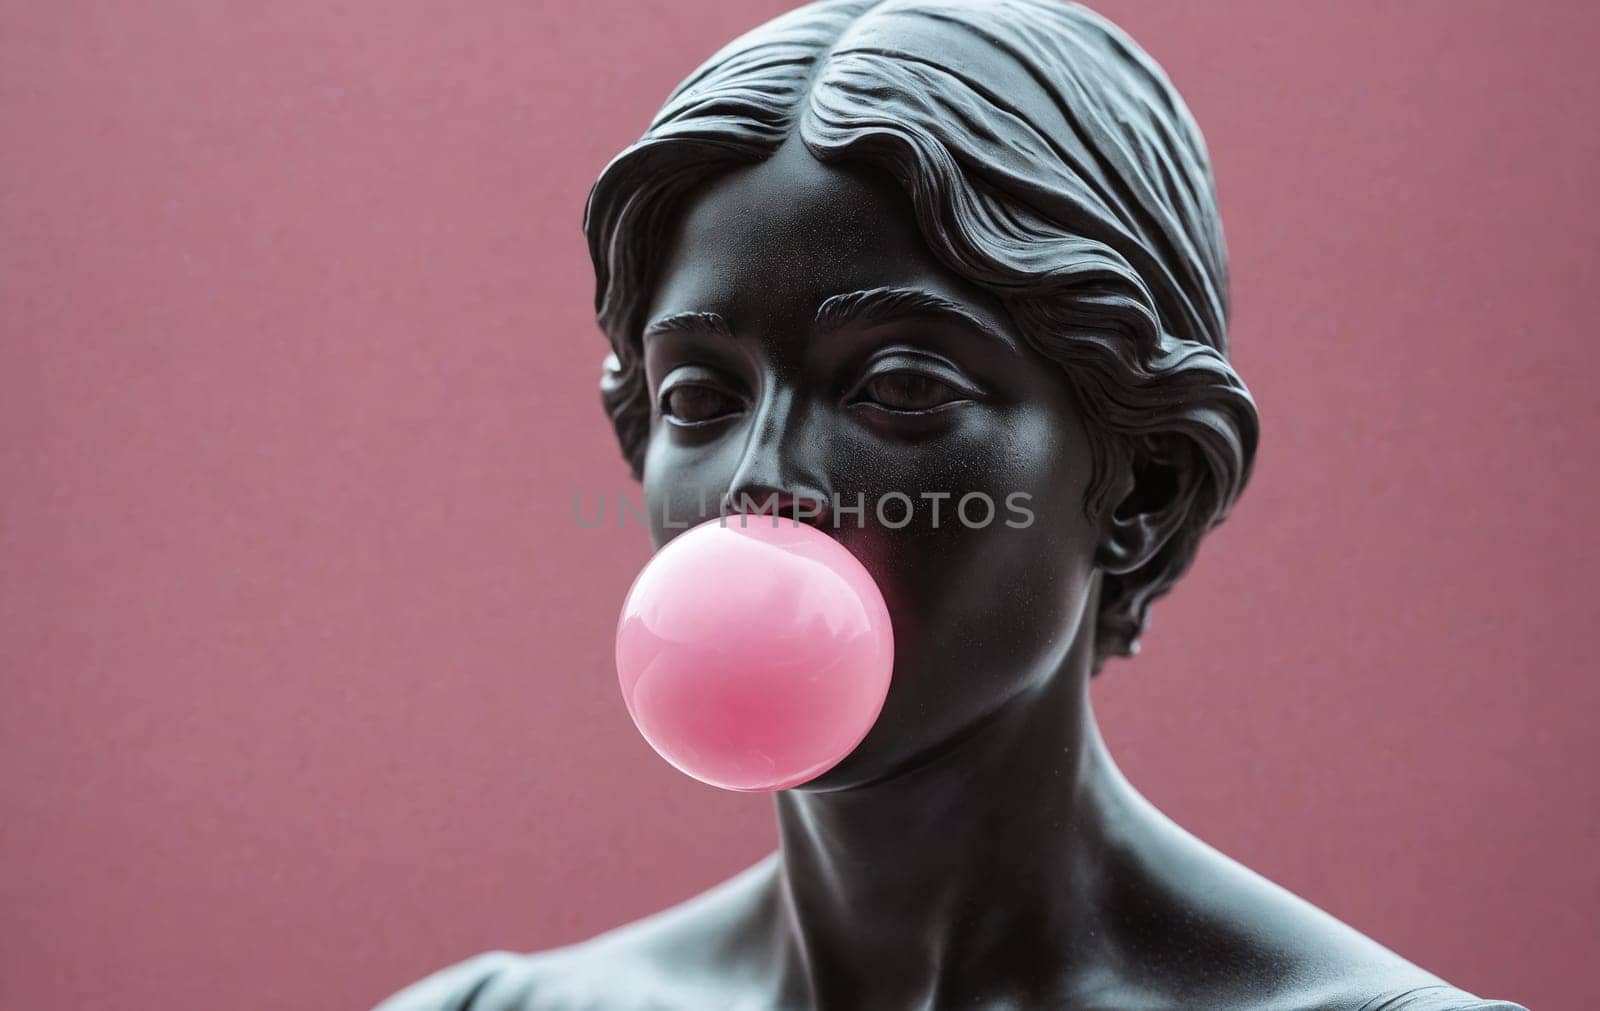 Sculpture of a woman with bubble gum, pink bubble from mouth by Andre1ns